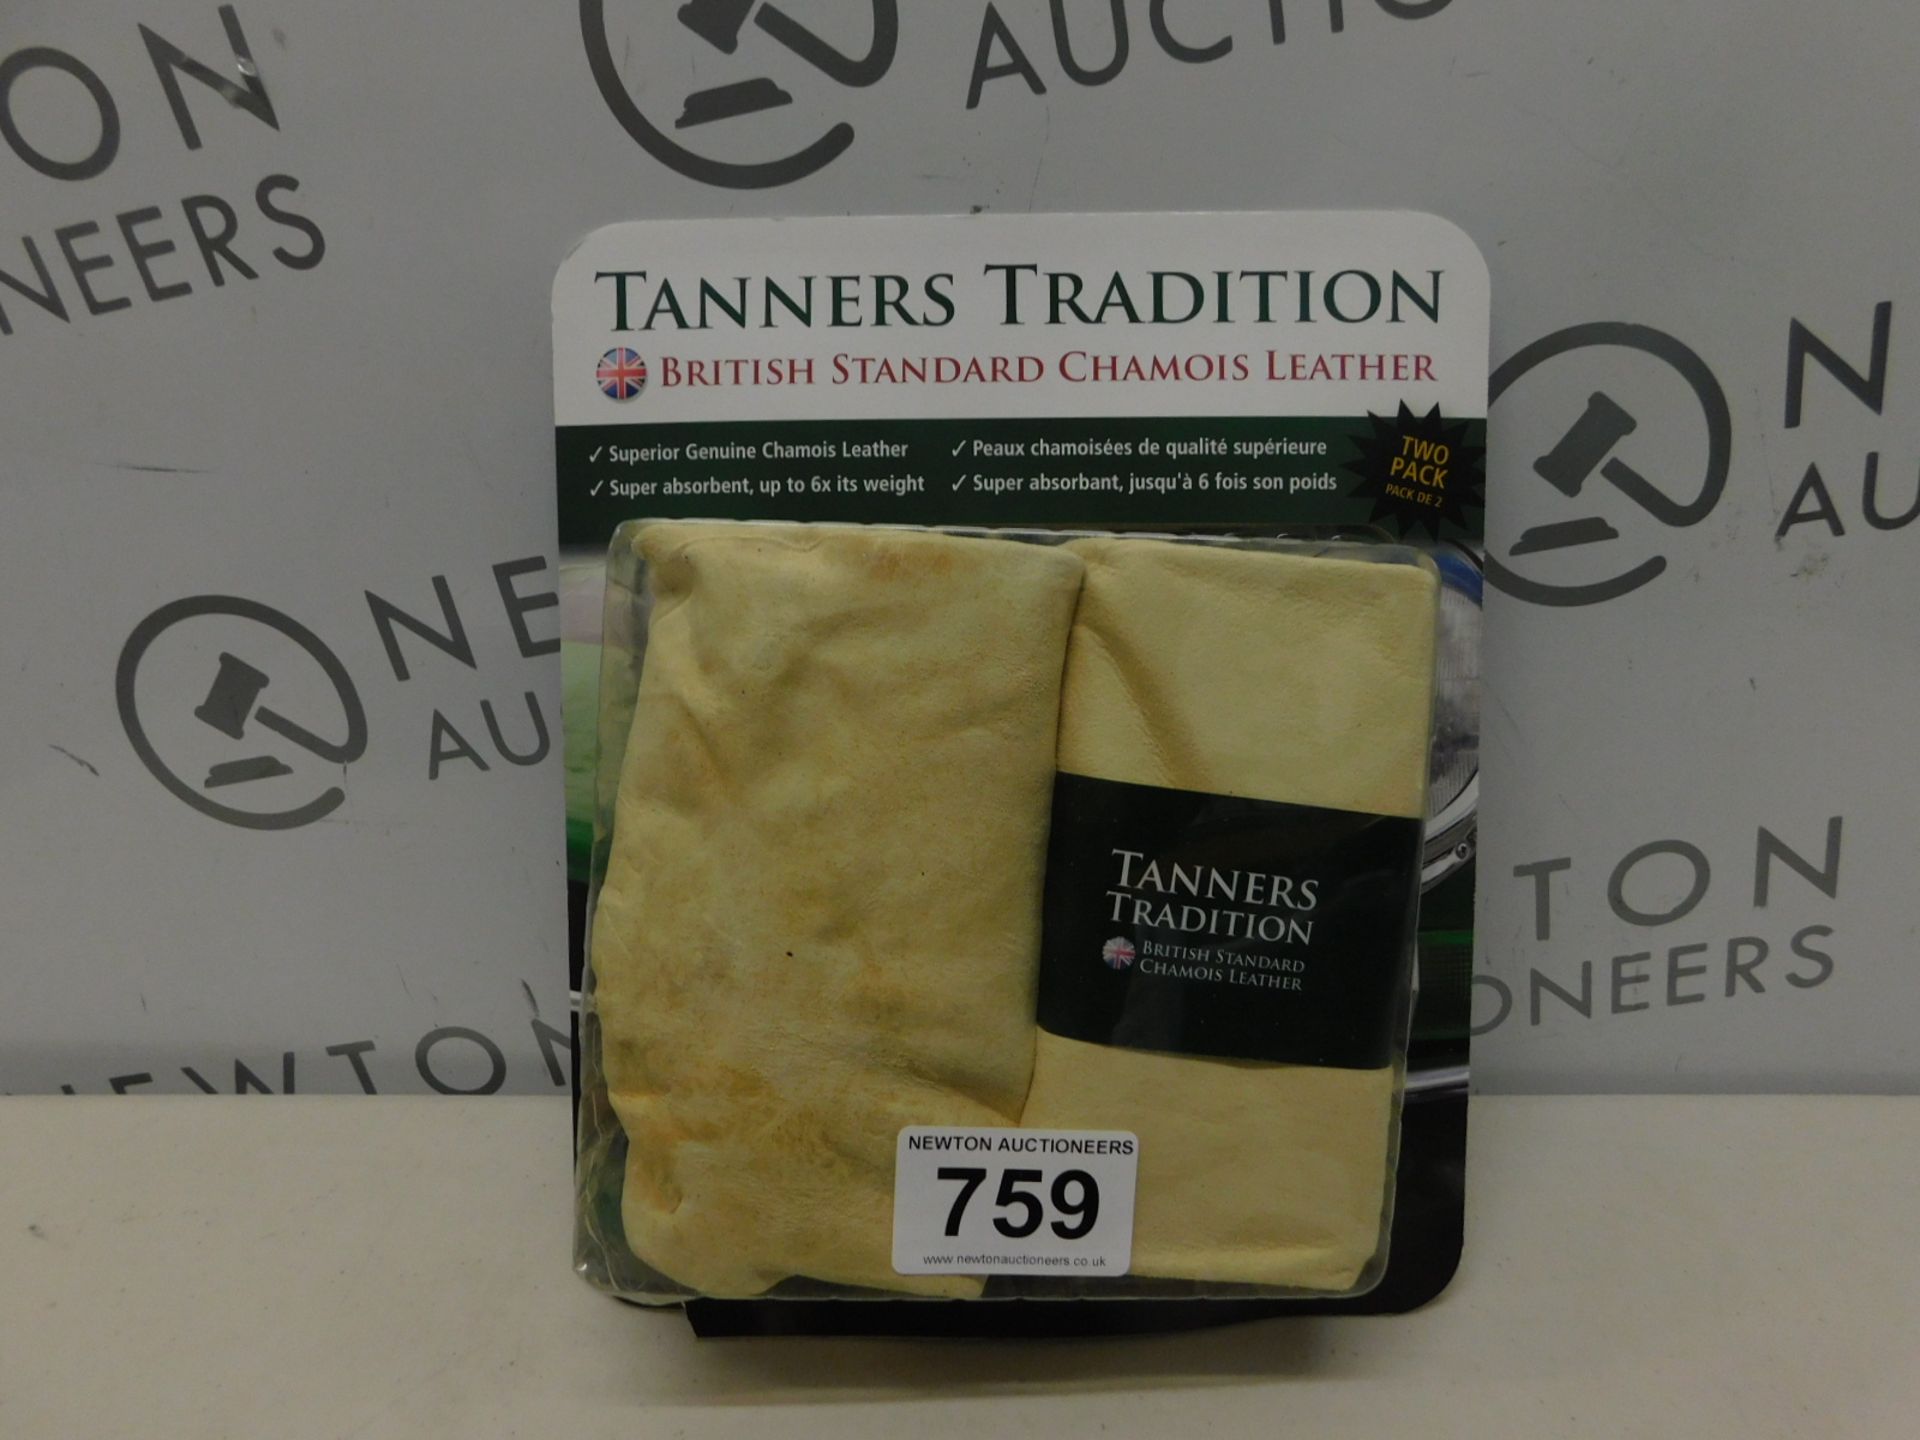 1 PACK OF 2 TANNERS TRADITION CHAMOIS LEATHER RRP £29.99